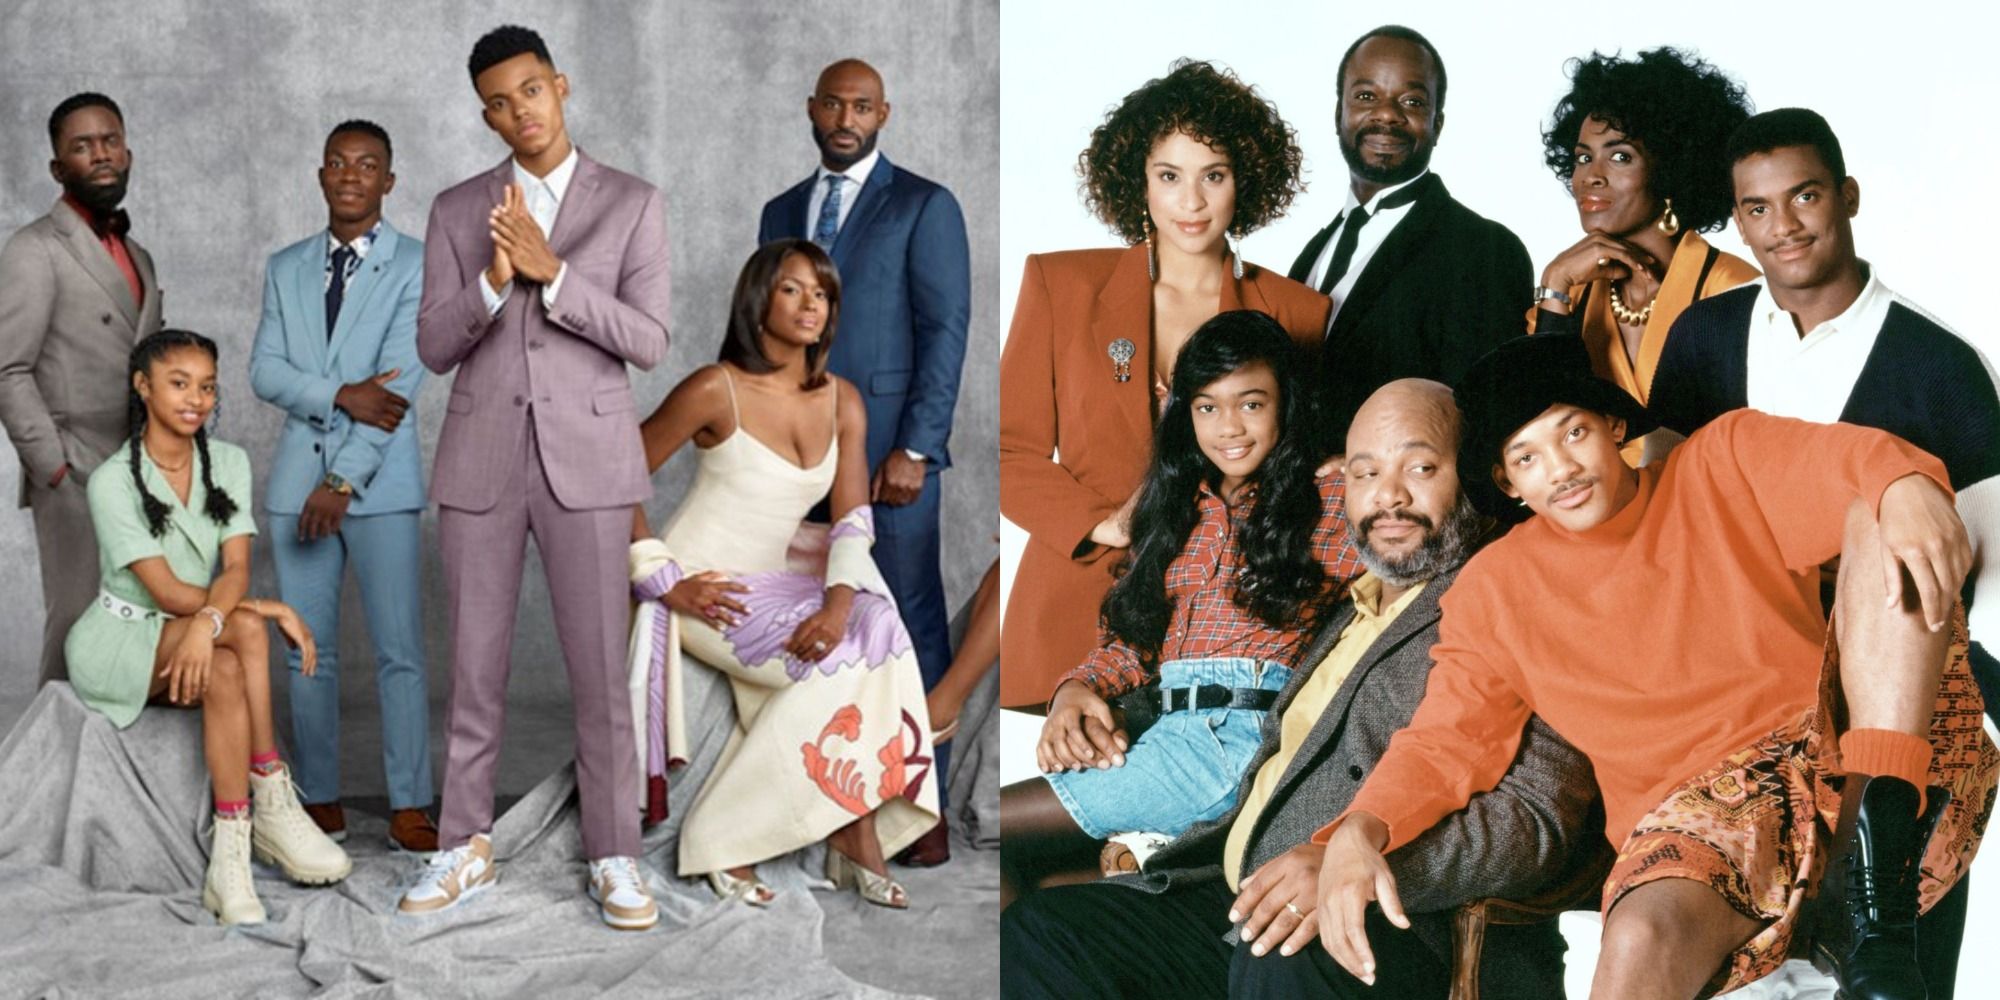 Split image showing the casts of Bel-Air and The Fresh Prince of Bel-Air